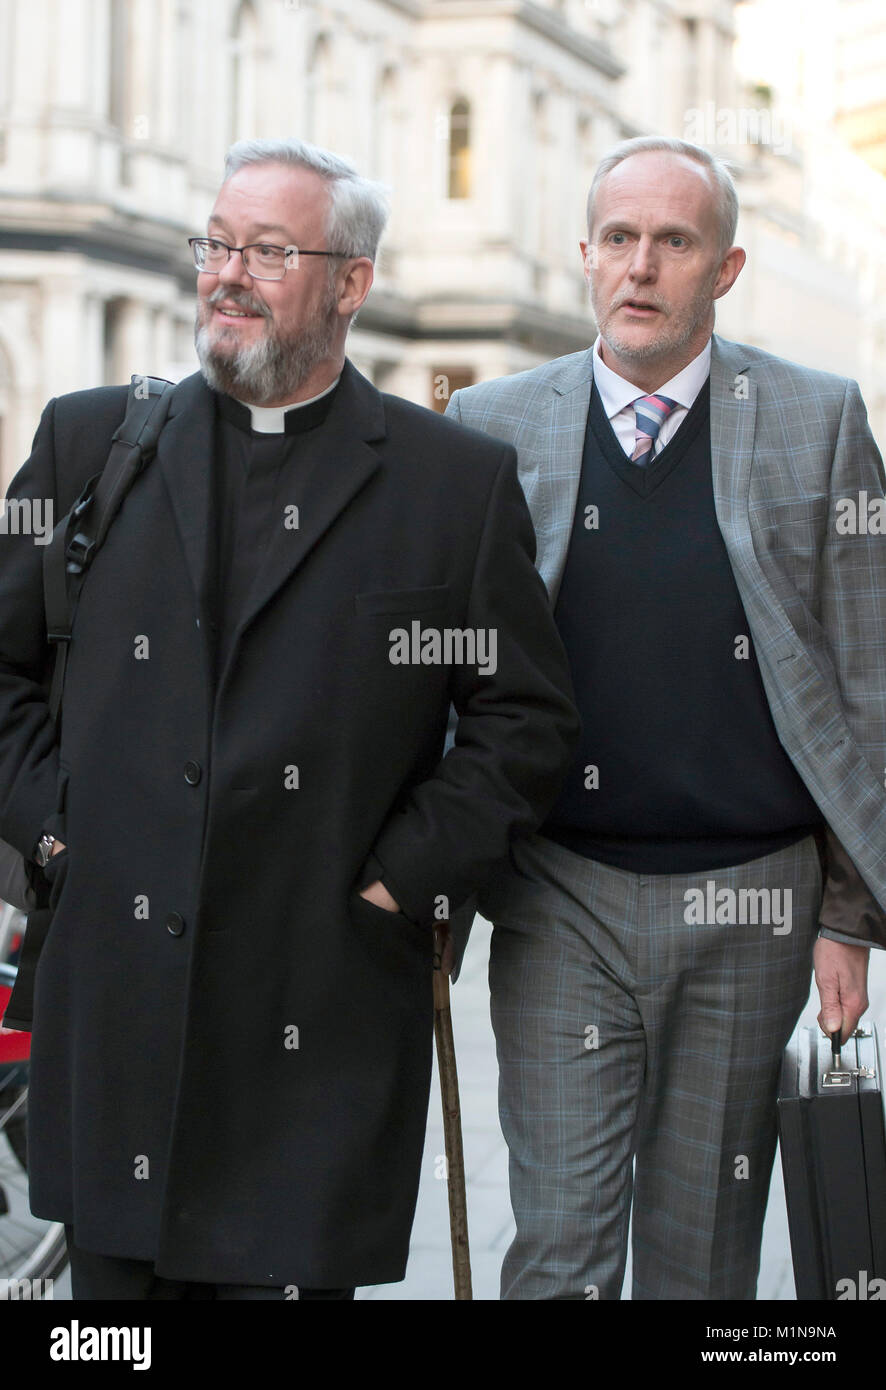 Canon Jeremy Pemberton (left) and husband Laurence Cunnington at the Royal Courts of Justice in London, as the gay priest who was prevented from working as a hospital chaplain after marrying his partner, has urged senior judges to find that he has suffered discrimination. Wednesday January 31, 2018. Canon Pemberton, a Church of England (C of E) priest for more than 30 years, had his permission to officiate revoked after he married his partner in April 2014. See PA story COURTS Pemberton. Photo credit should read: David Mirzoeff/PA Wire Stock Photo